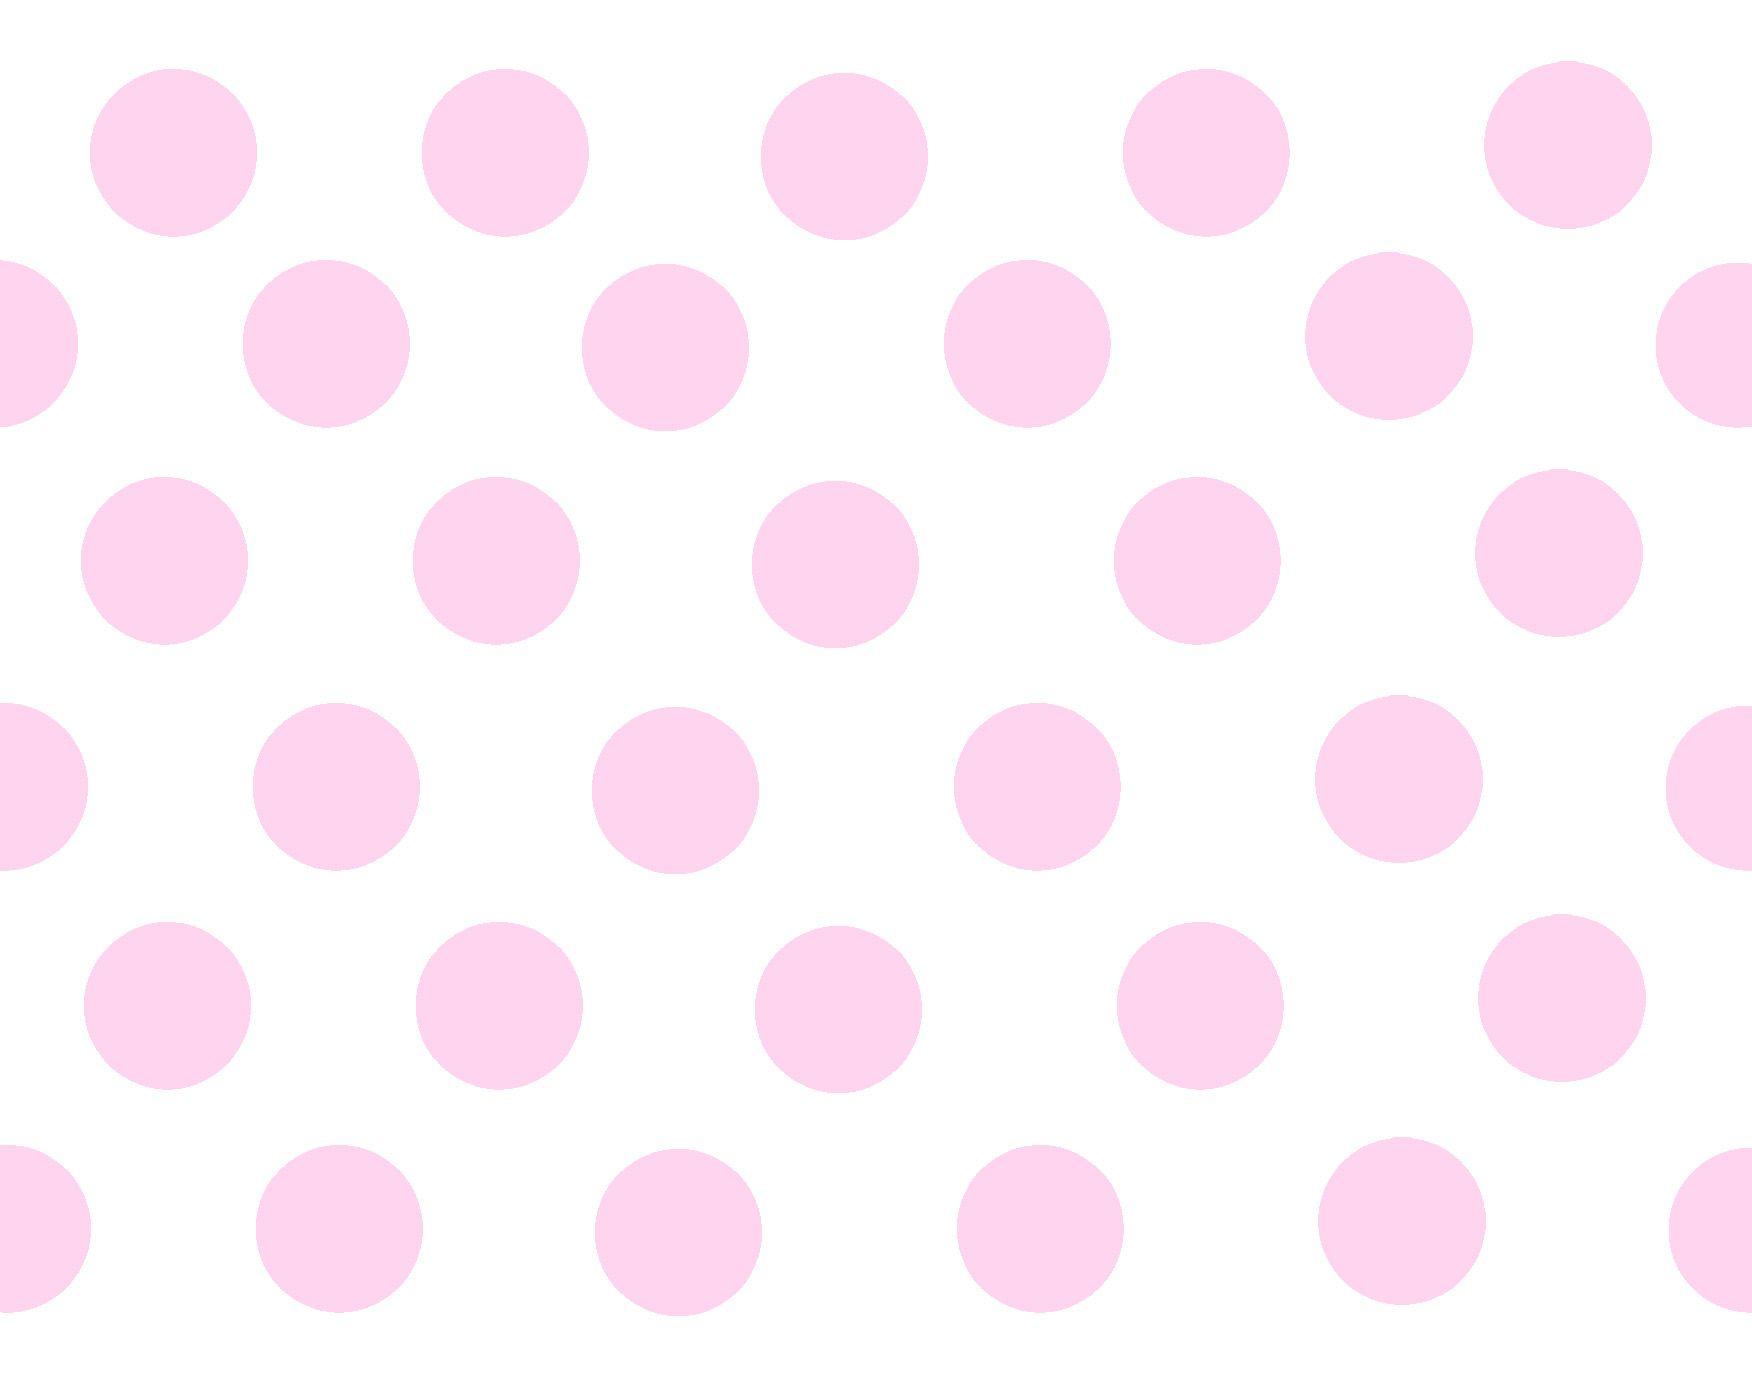 8. Polka Dot Purple, Pink, and White Nails - wide 10